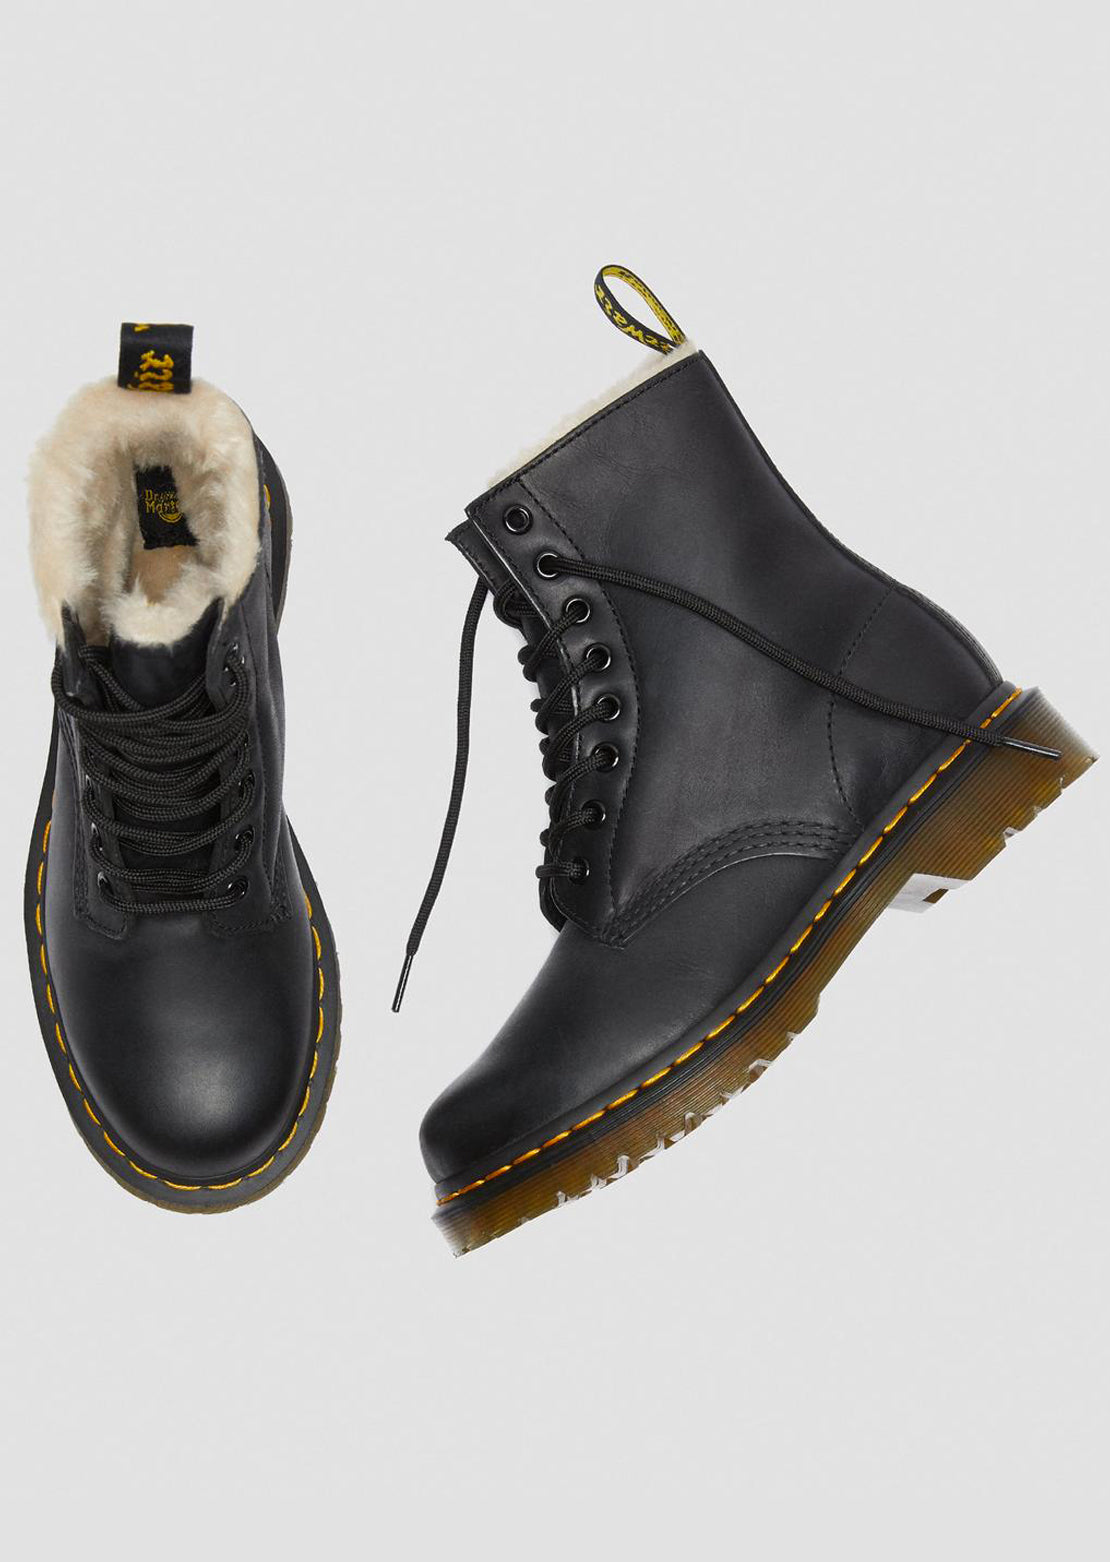 Dr.Martens Women’s 1460 Serena Wyoming Boots Black